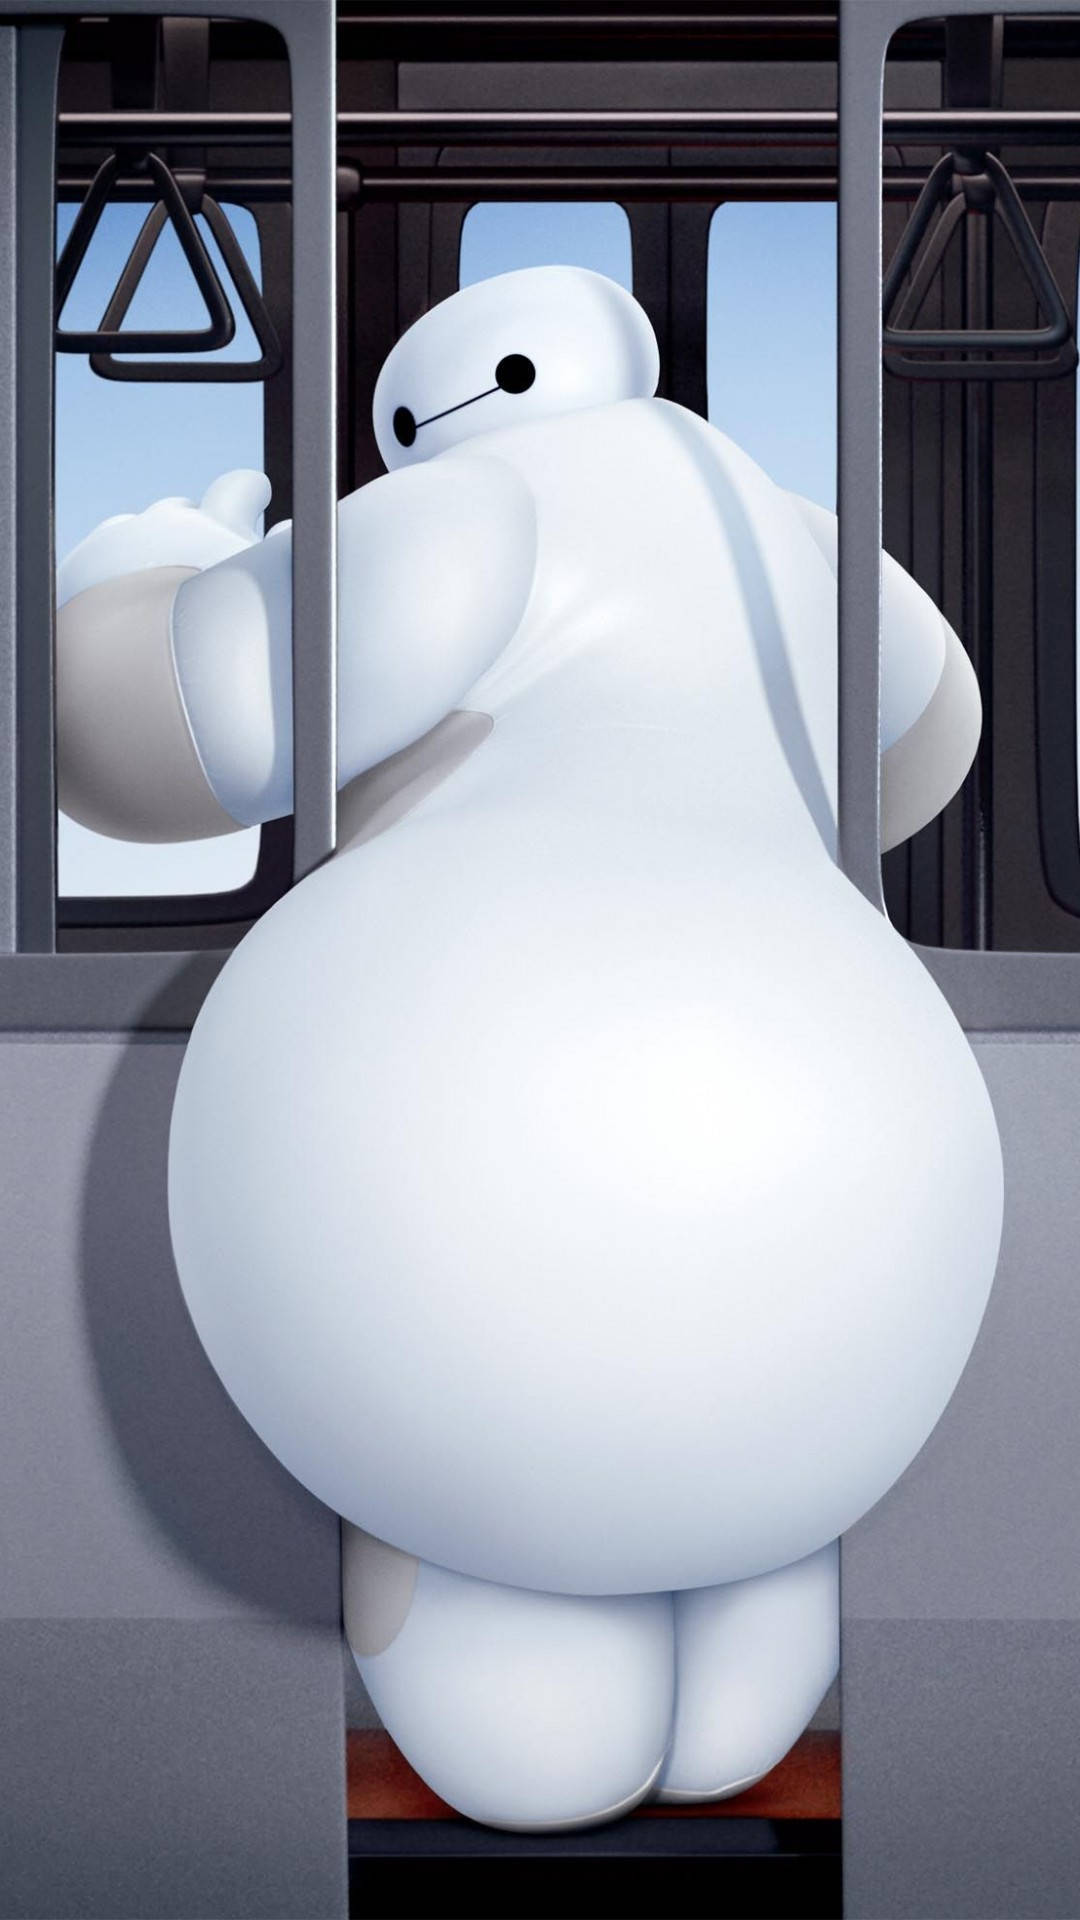 Free Baymax Wallpaper Downloads, [100+] Baymax Wallpapers for FREE |  